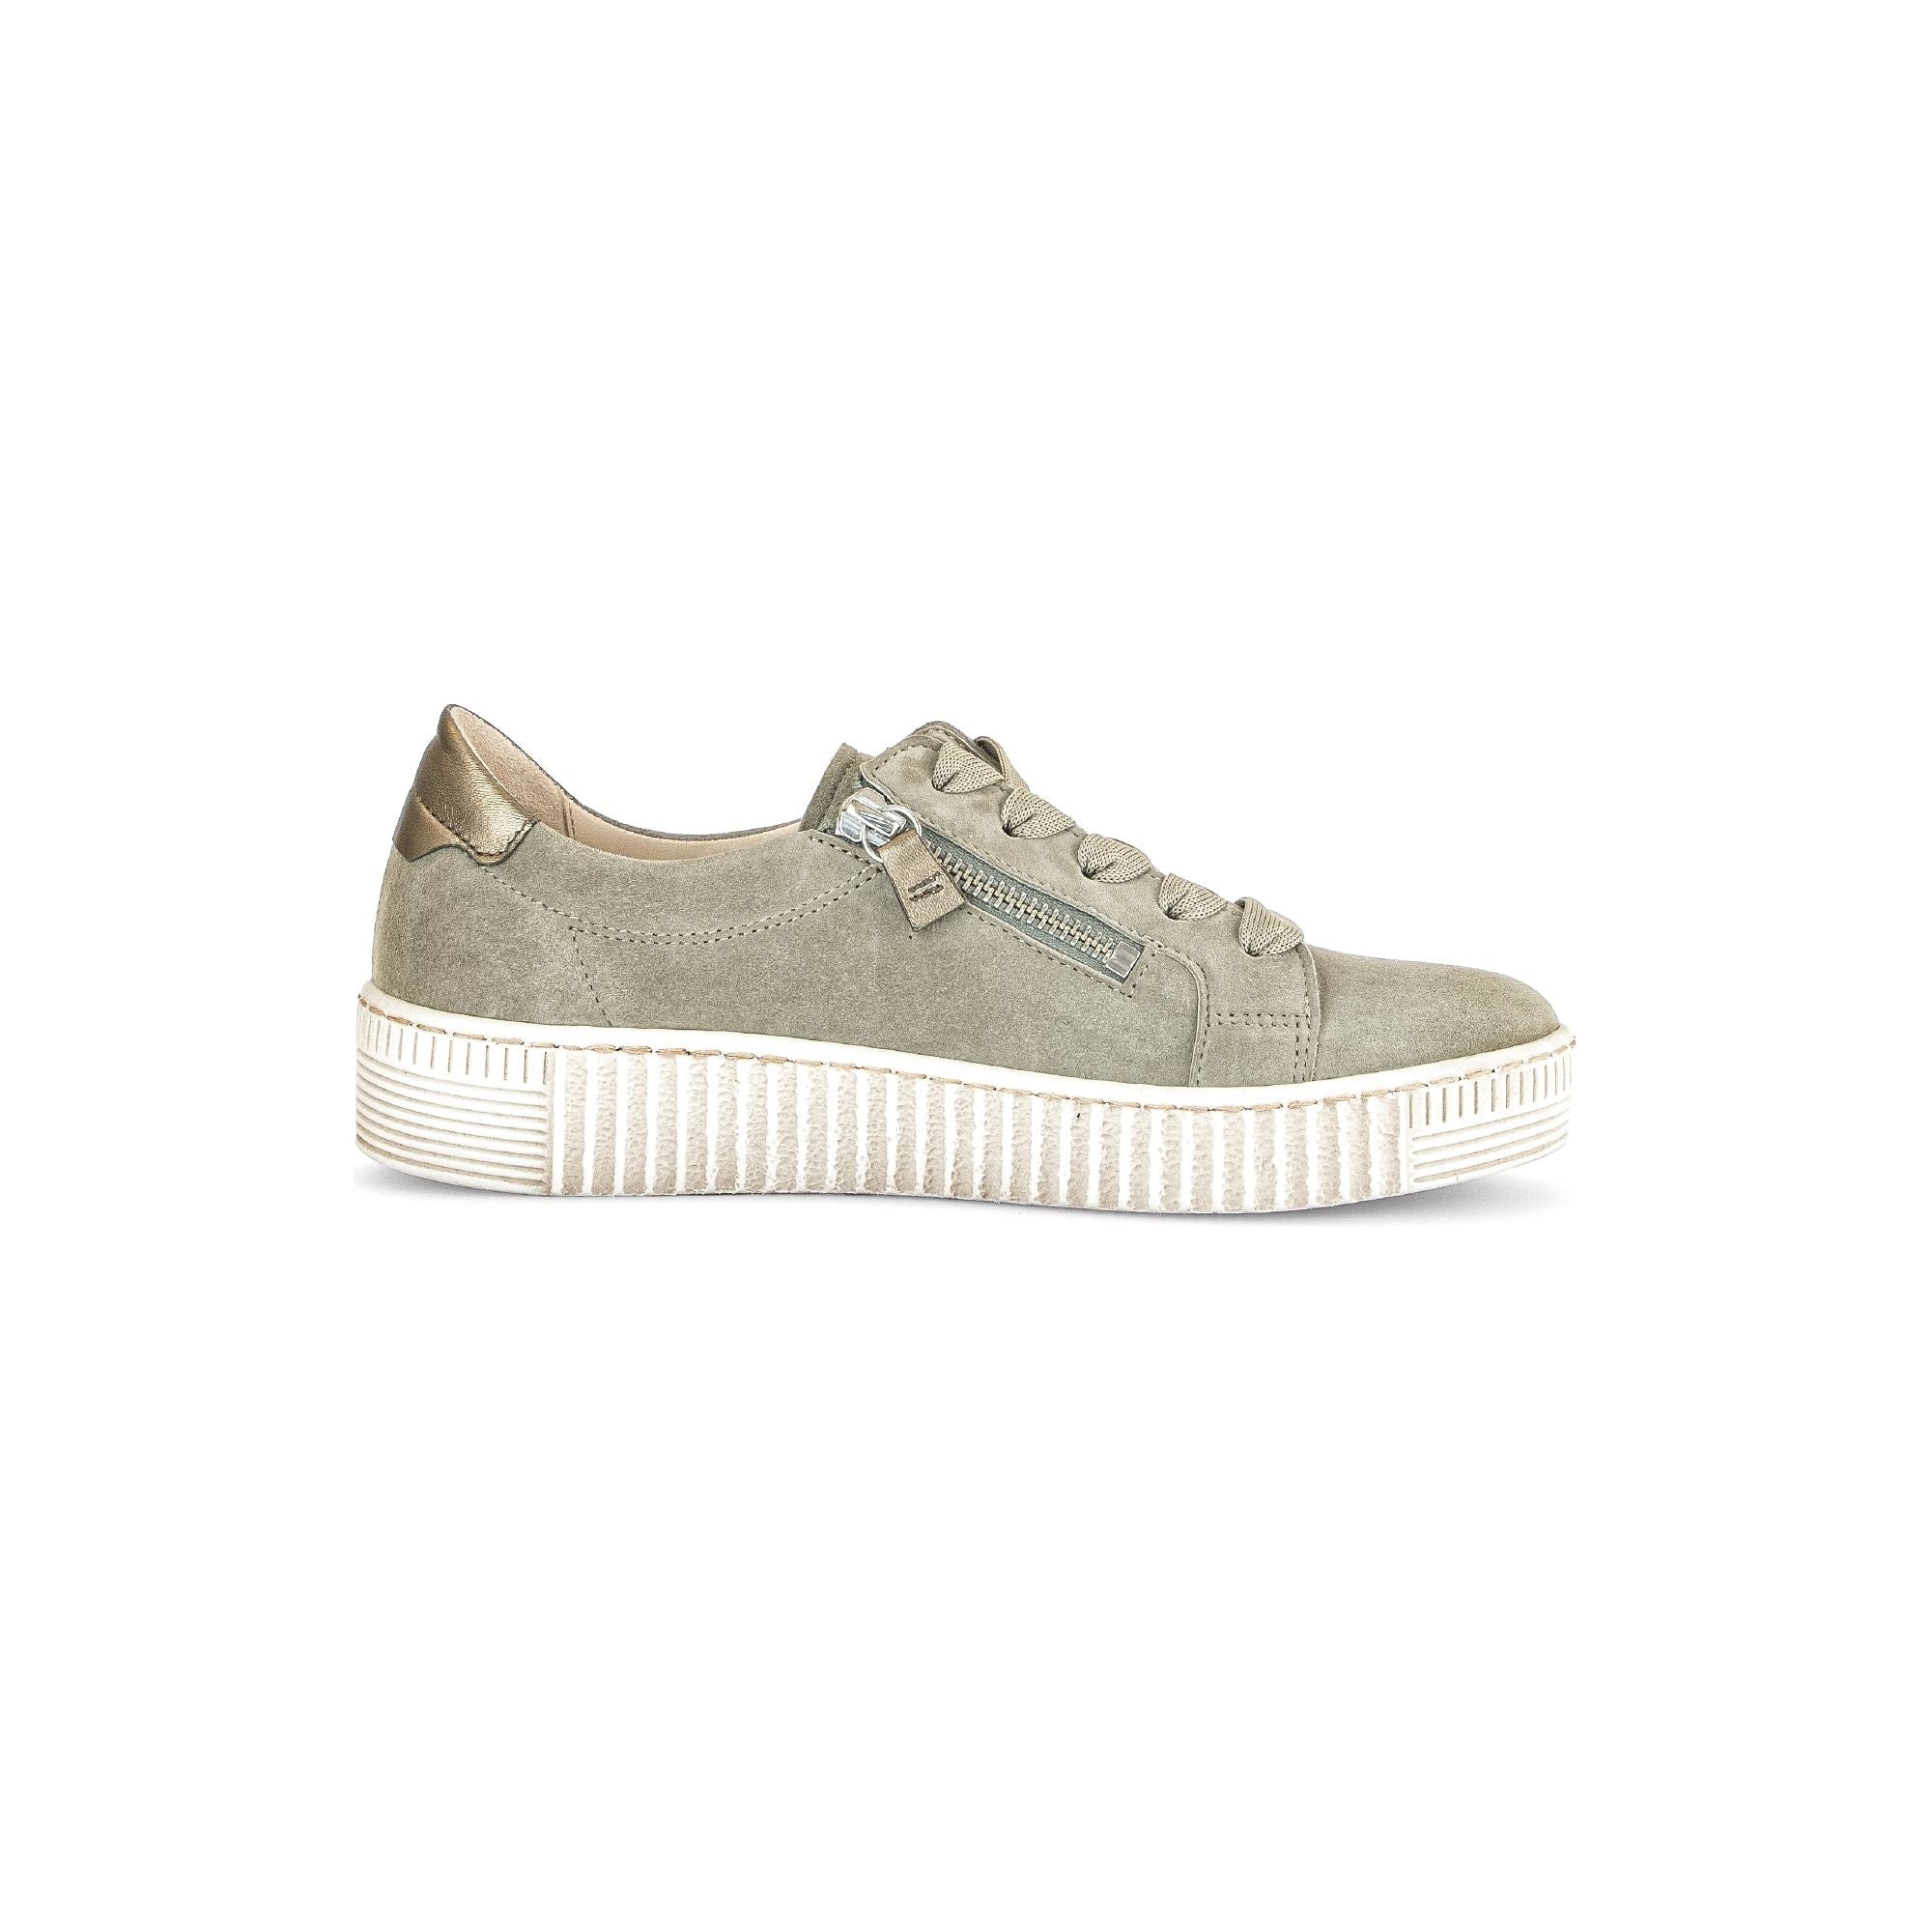 Gabor Wisdom(43.334.11) - Ladies Lace Trainer with Double Zip in Sage Green Suede. Gabor Shoes | Wisemans | Bantry | Shoe Shop | West Cork | Ireland